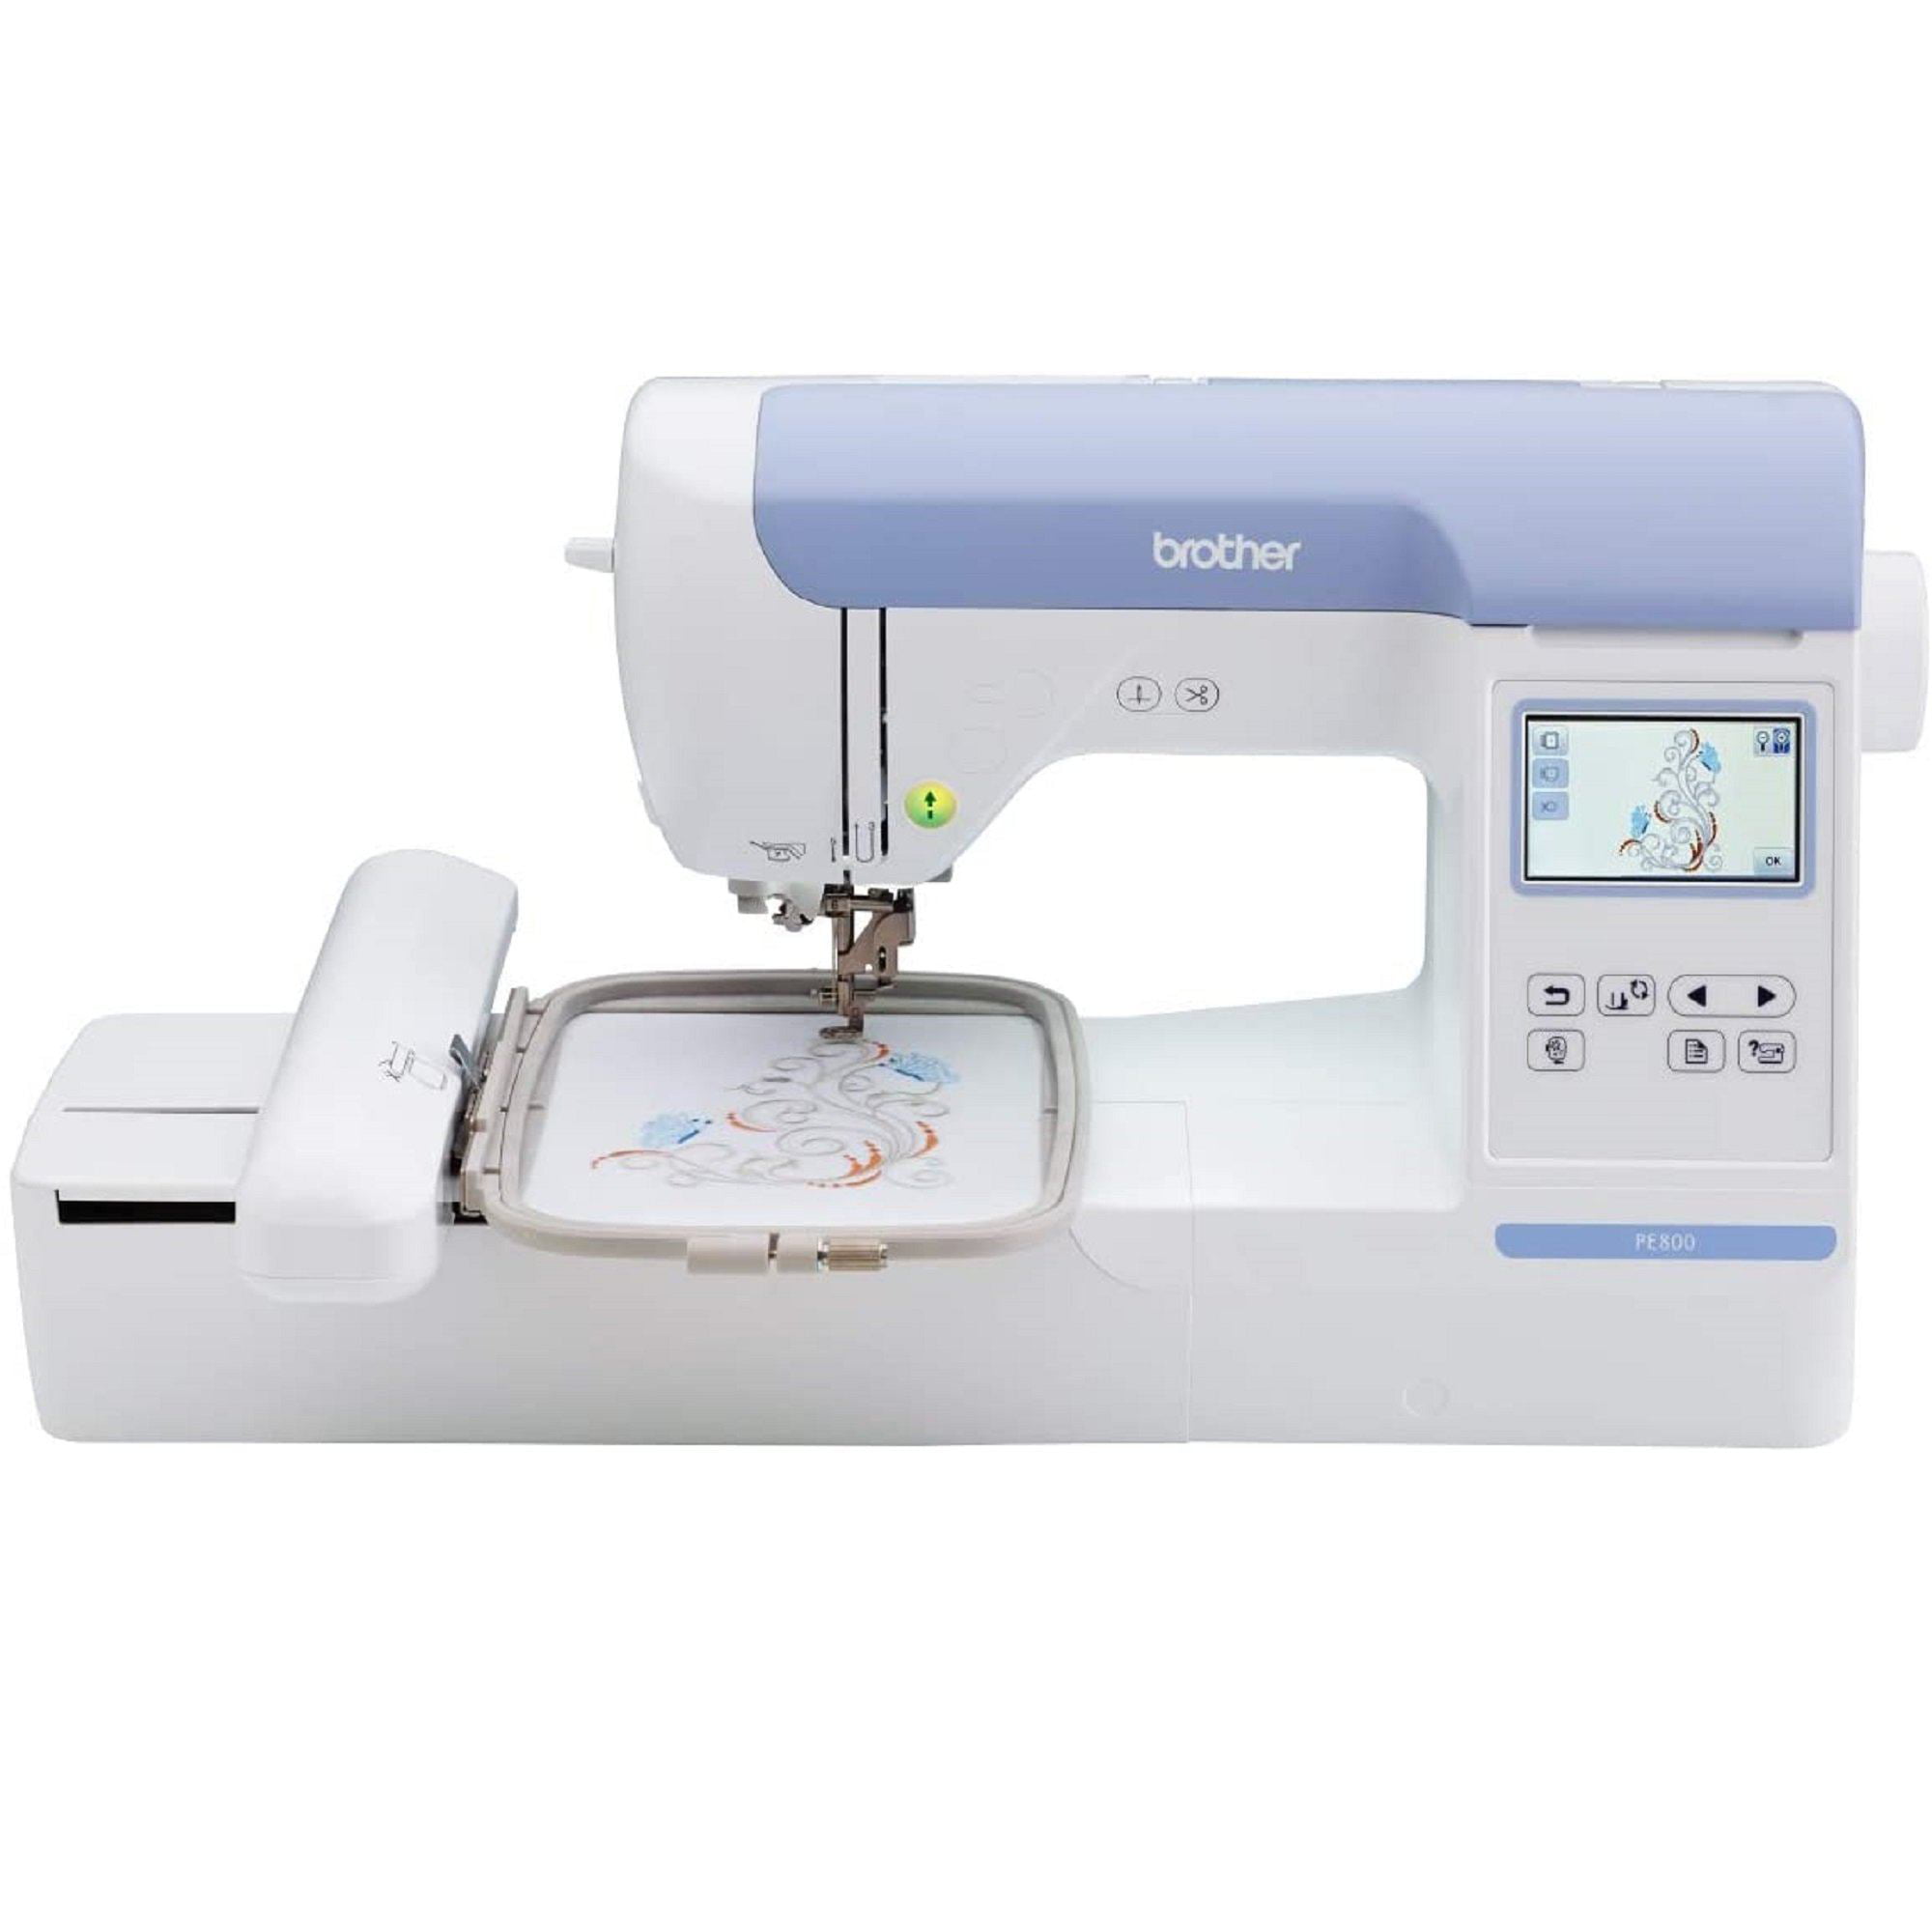 Original 2020/2021 Brother PE800 5 x 7 Embroidery Machine with Large Color  Touch LCD Screen NEW at Rs 55000 in Nashik